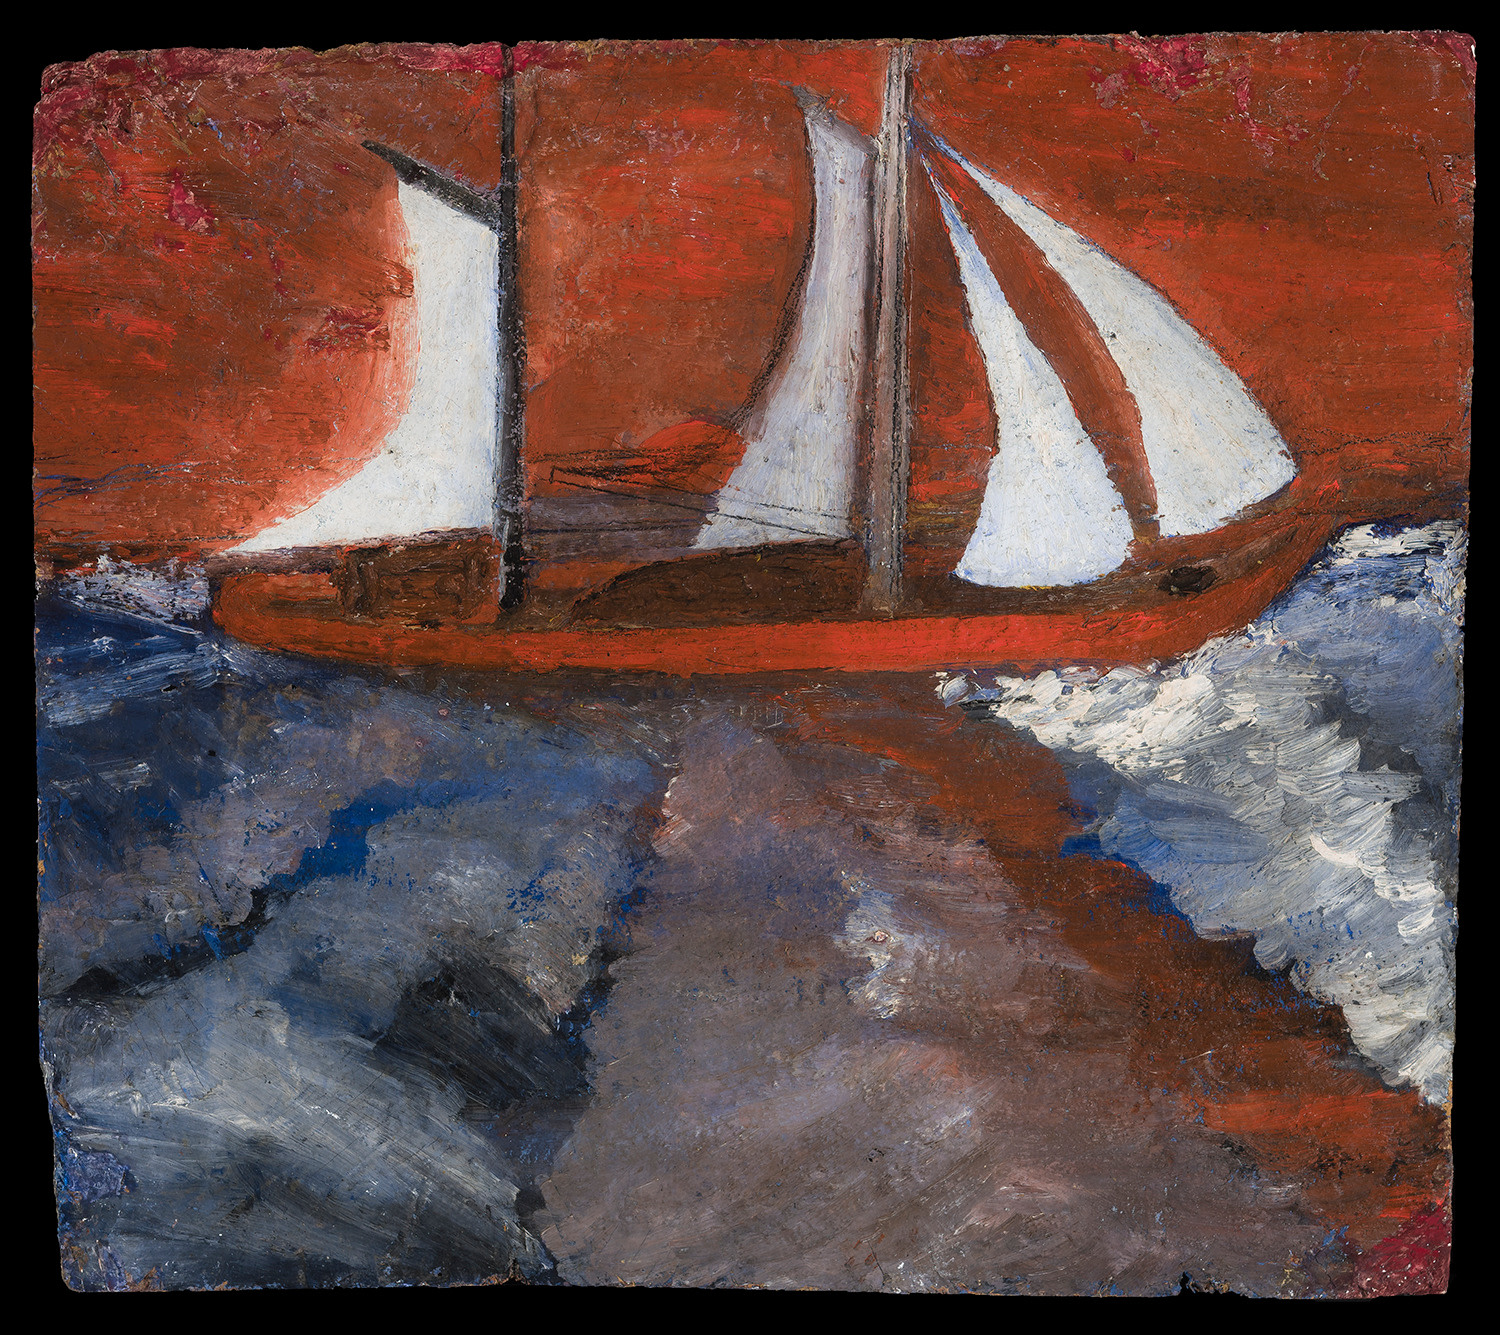 a marine painting by Frank Walter of a red sailboat in a turbulent ocean with a bright red sky